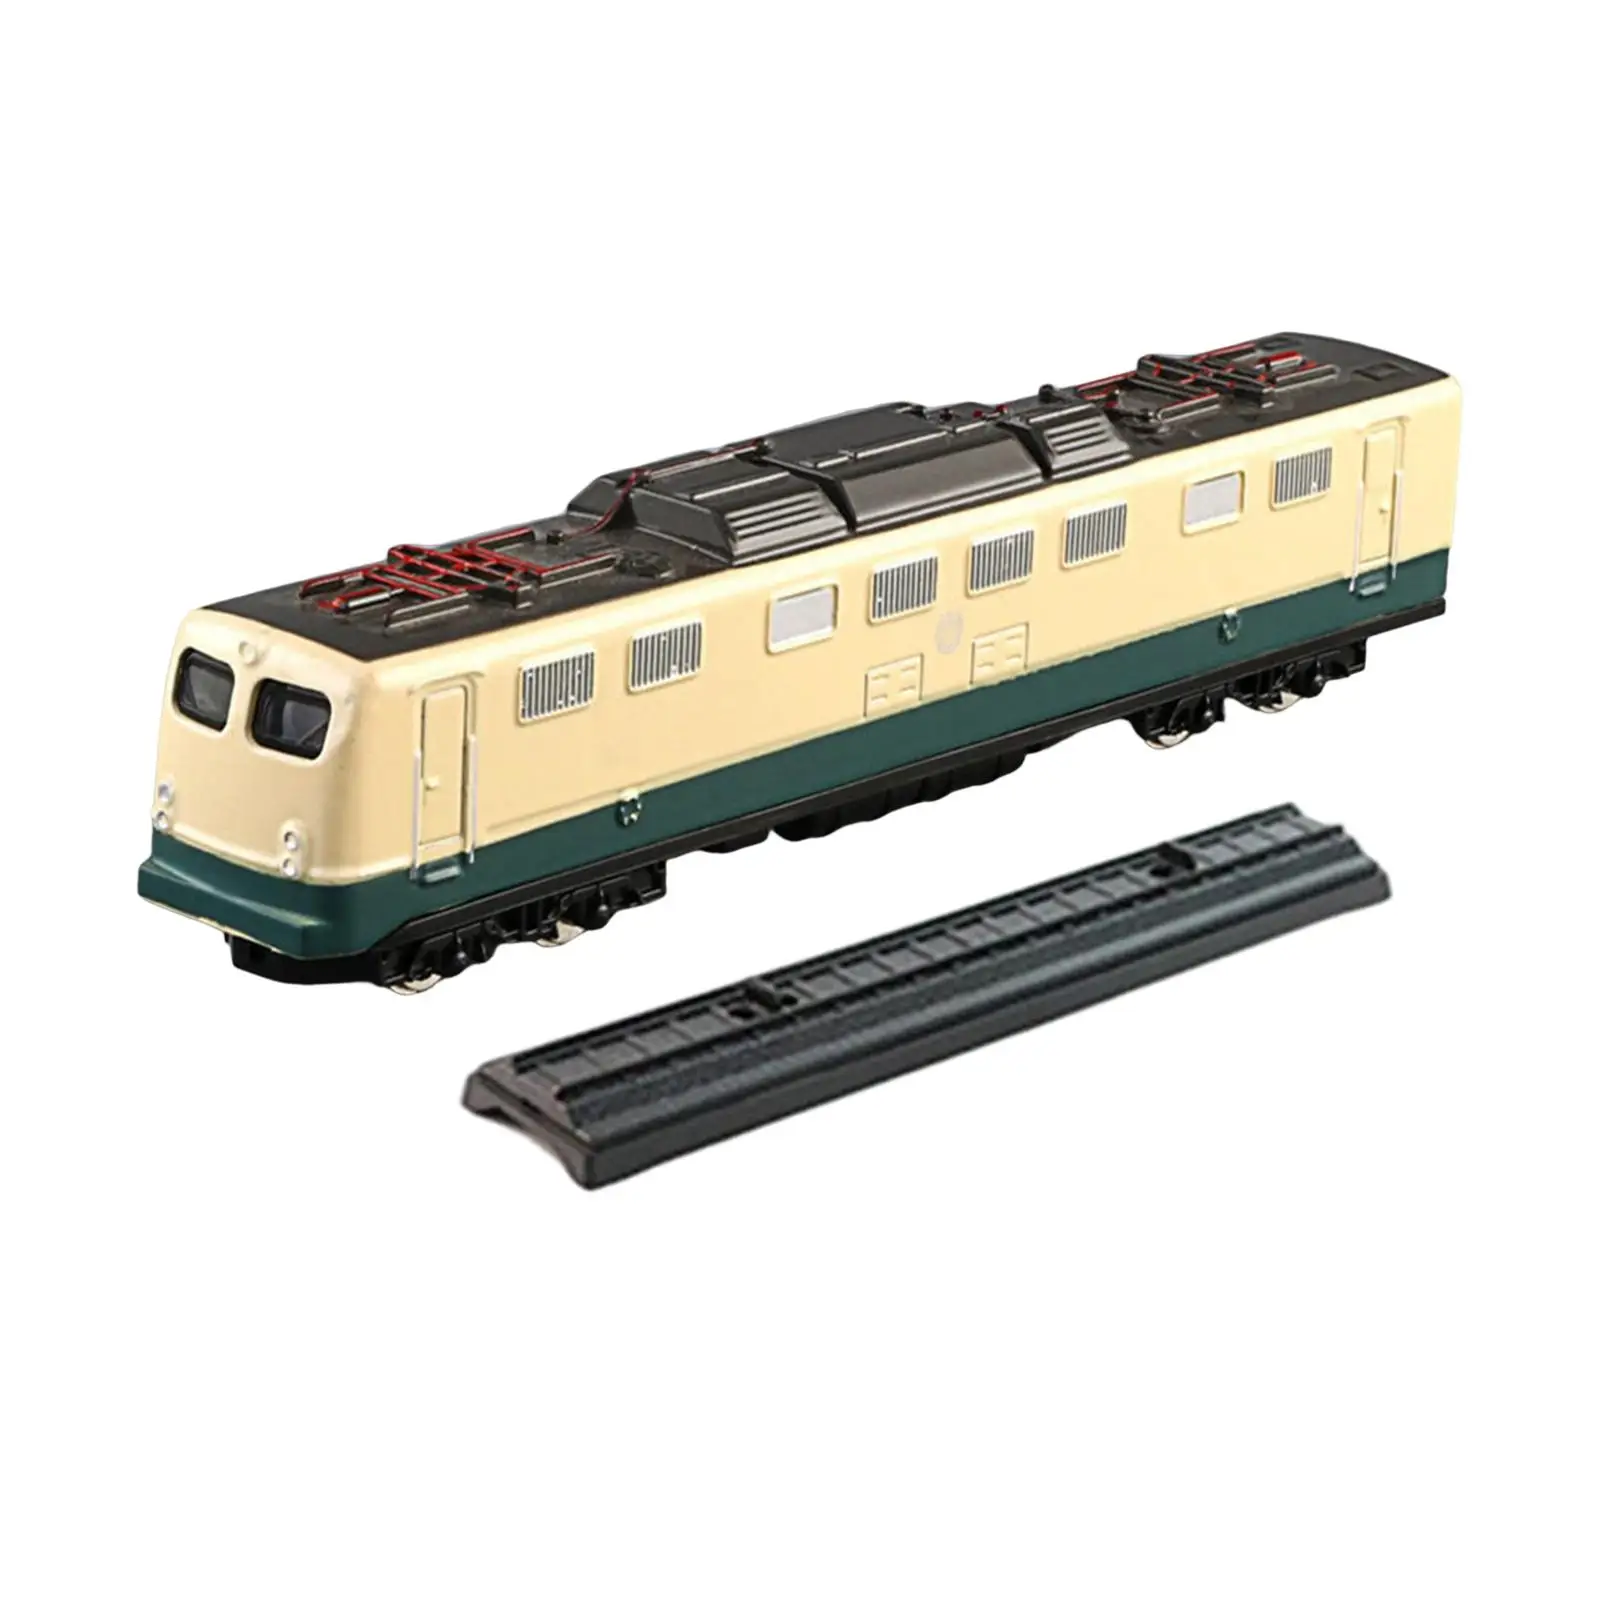 Simulation Steam Train Model Toys with Rail Diecast Model modern Locomotives for Toddlers Kids Birthday Gifts